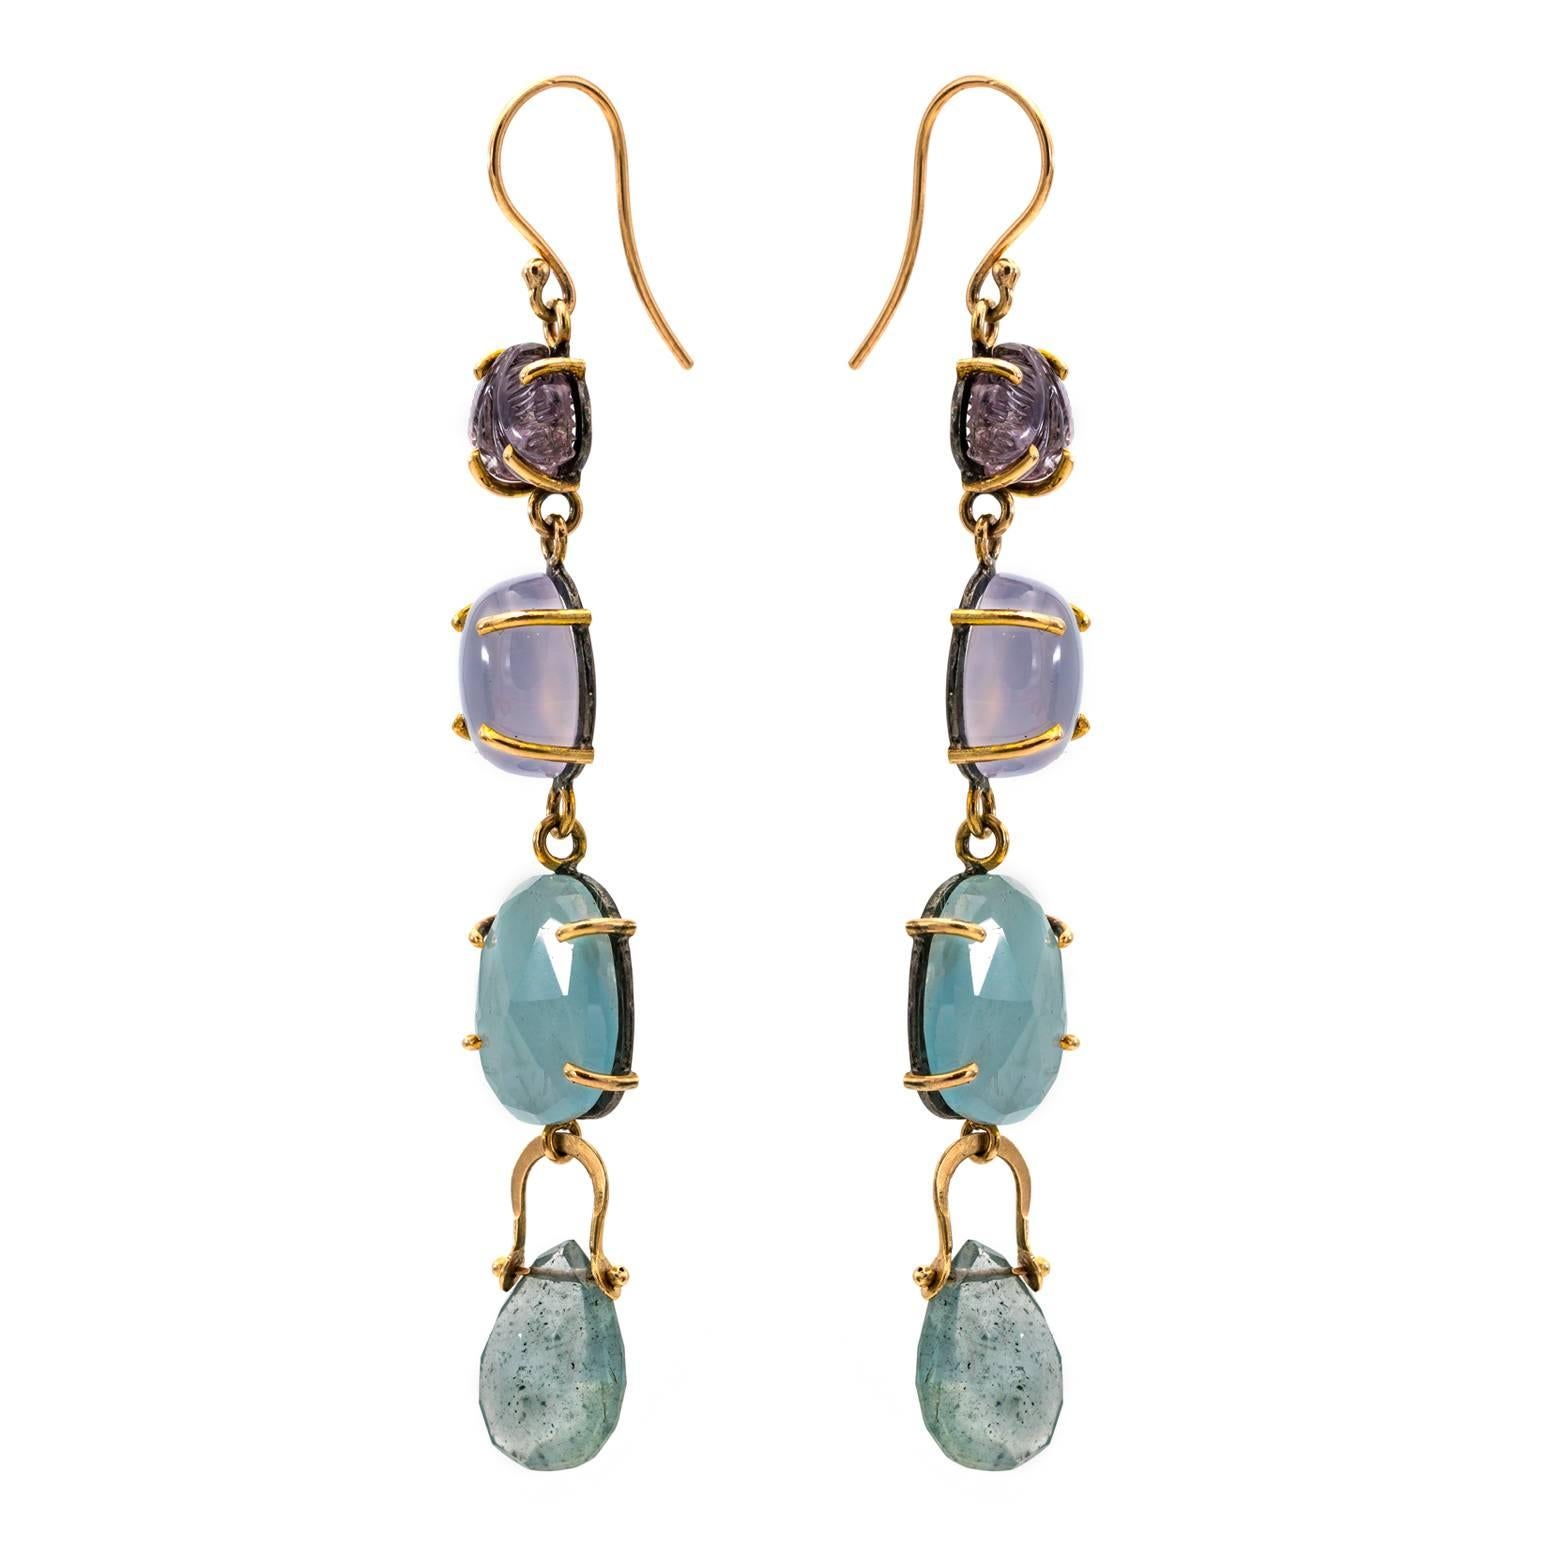 These yummy earrings are full of color with several complimentary colors in aquamarine, moss aqua and chalcadony. The carved stones at the top are tourmaline in the shape of a bud. The 14k accents beautifully display all the yummy colors and the